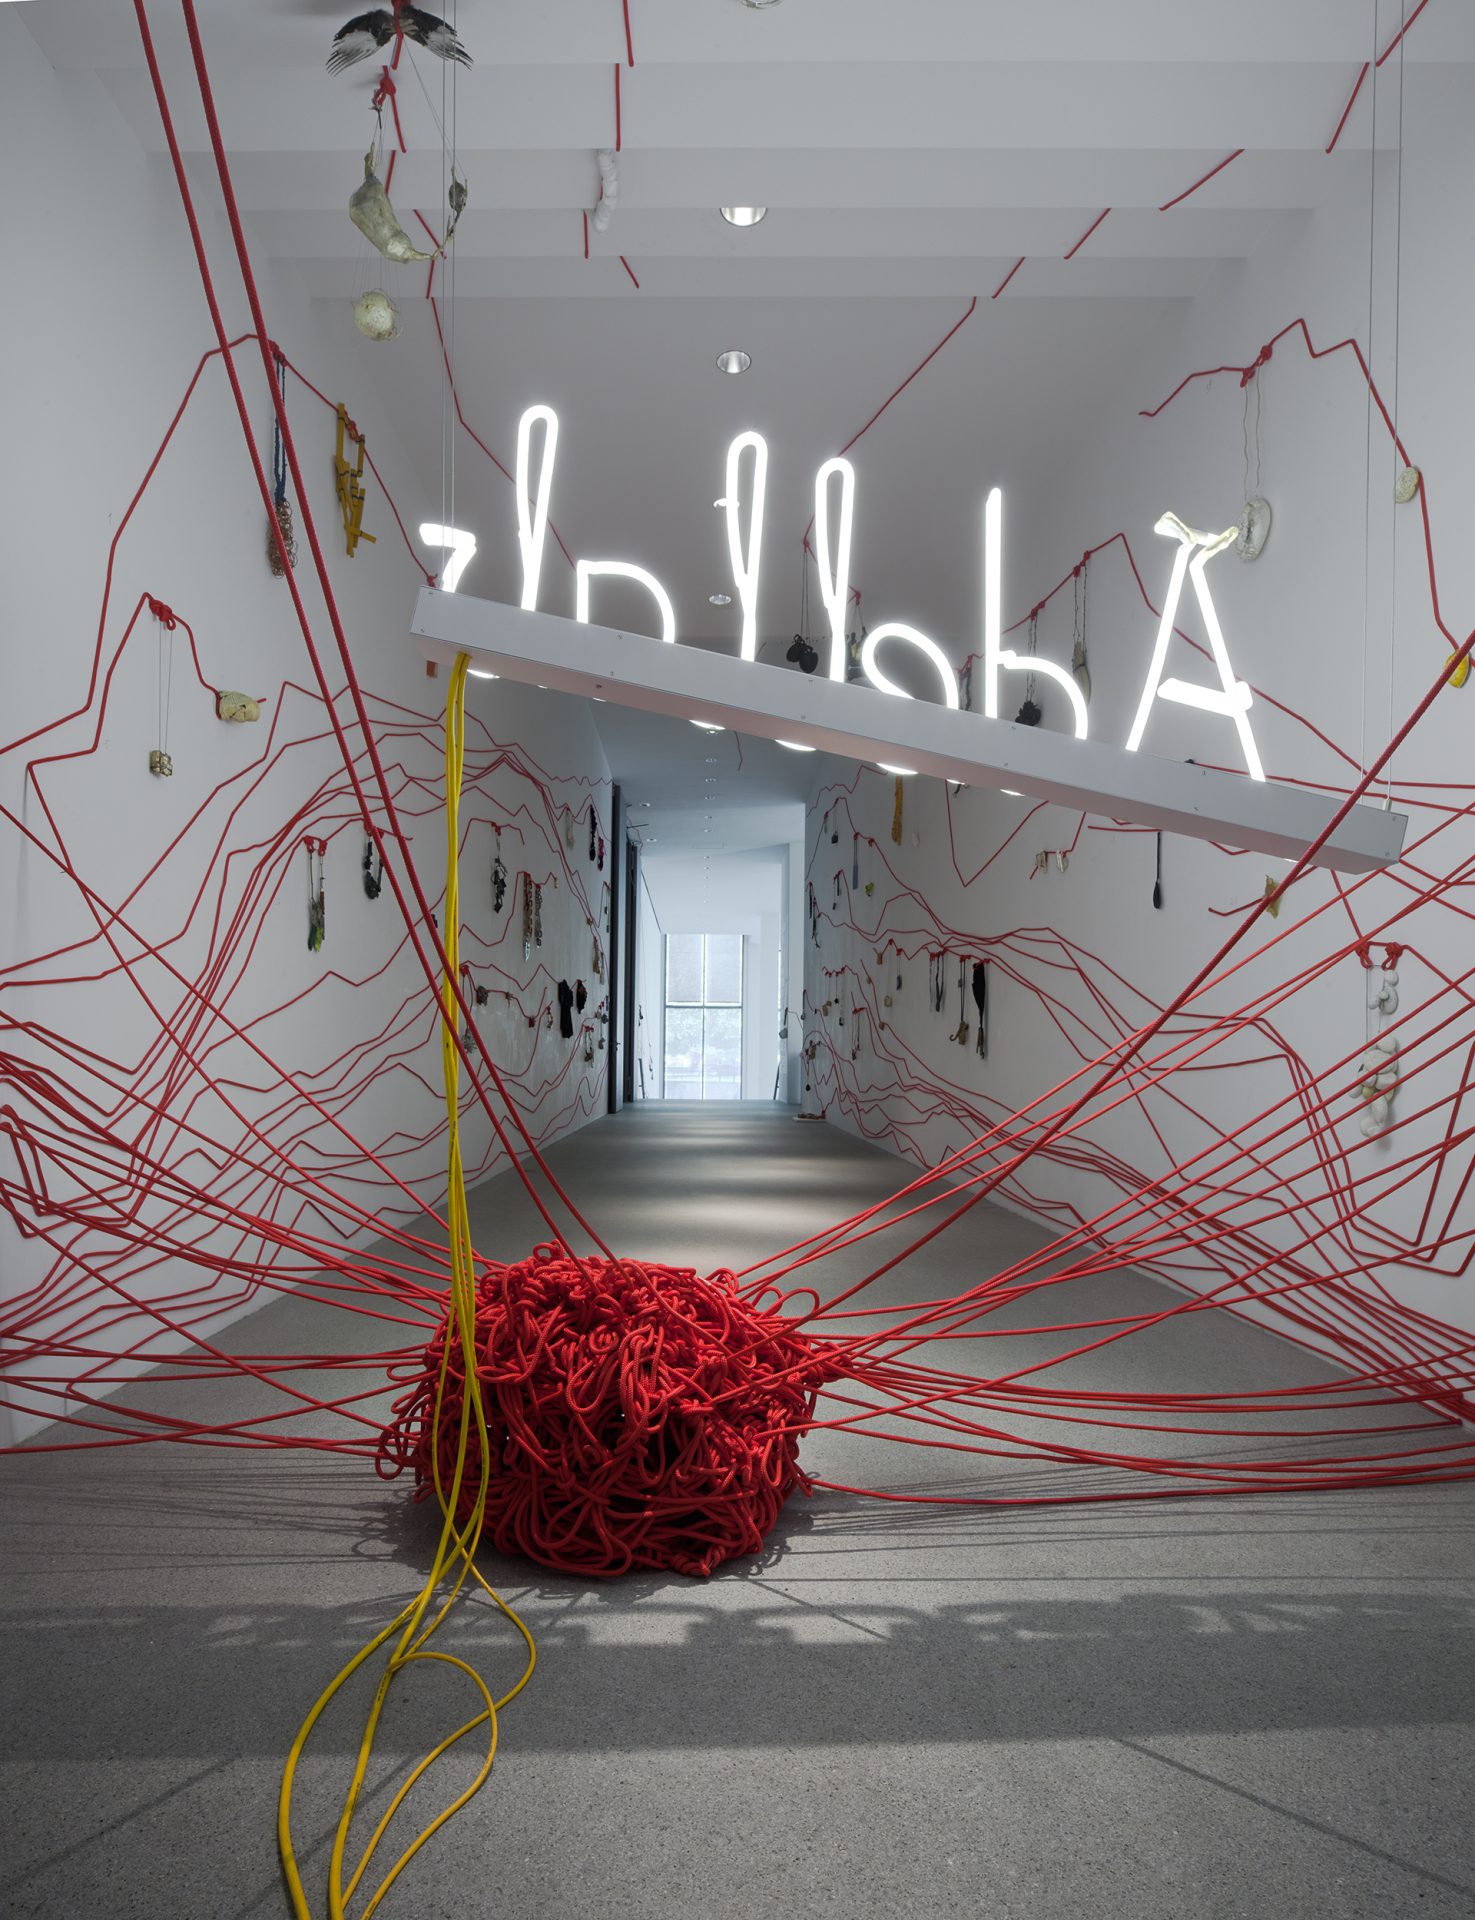 View of the exhibition. You can see a large red ball of wool lying on the floor in the middle of a corridor. The word Ädellab is written in neon letters above the ball of wool. Countless threads extend from the ball of wool, running along the walls to the right and left and across the ceiling. The individual pieces of jewelry in the exhibition are attached to the threads.